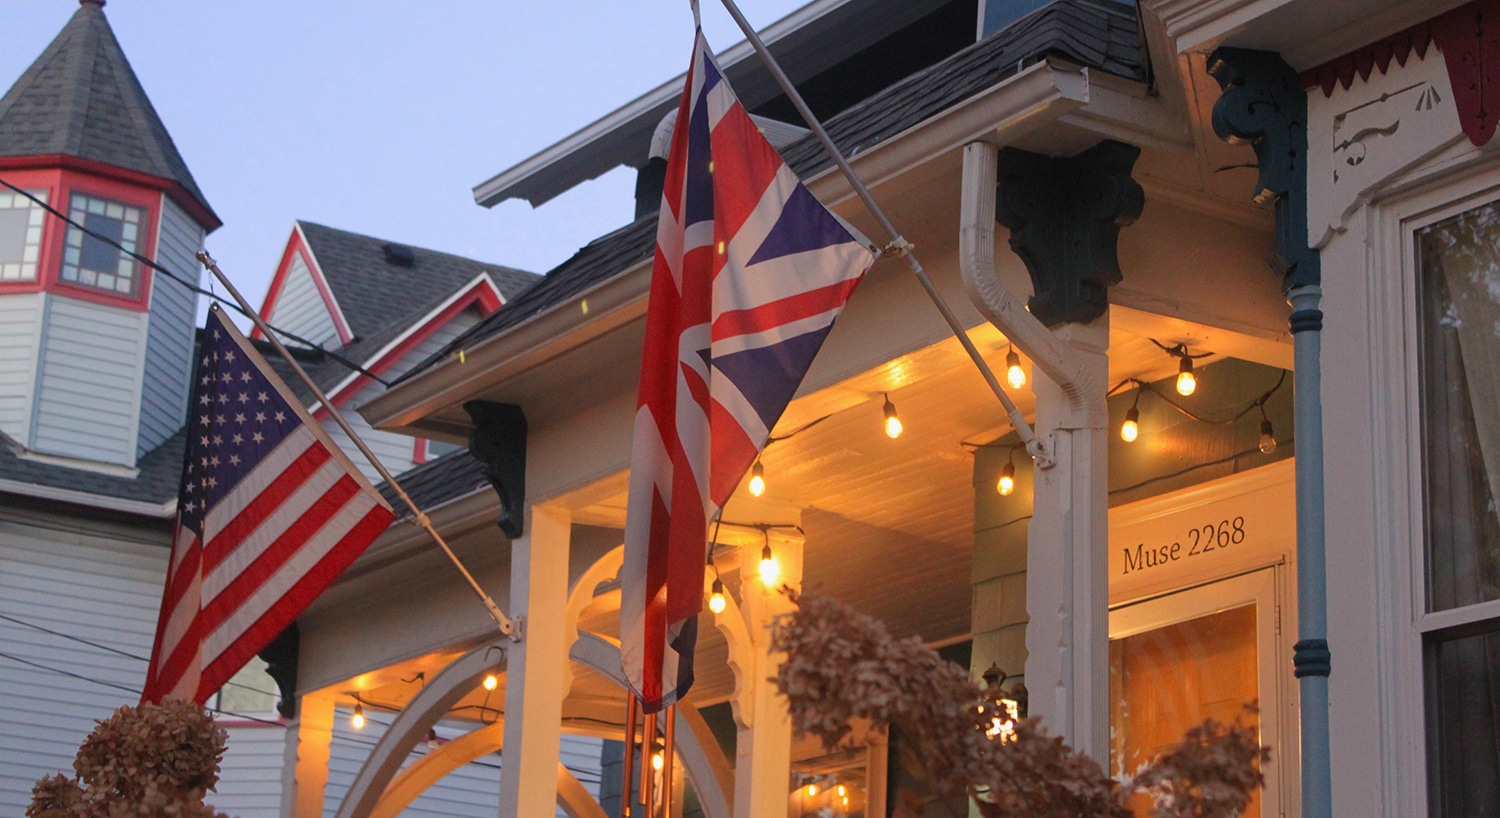 USA and UK flags fly from the porch at the main entrance. Warmly glowing white string lights decorate the porch ceiling. The turret and roof of the Victorian house next door are visible in the background. 